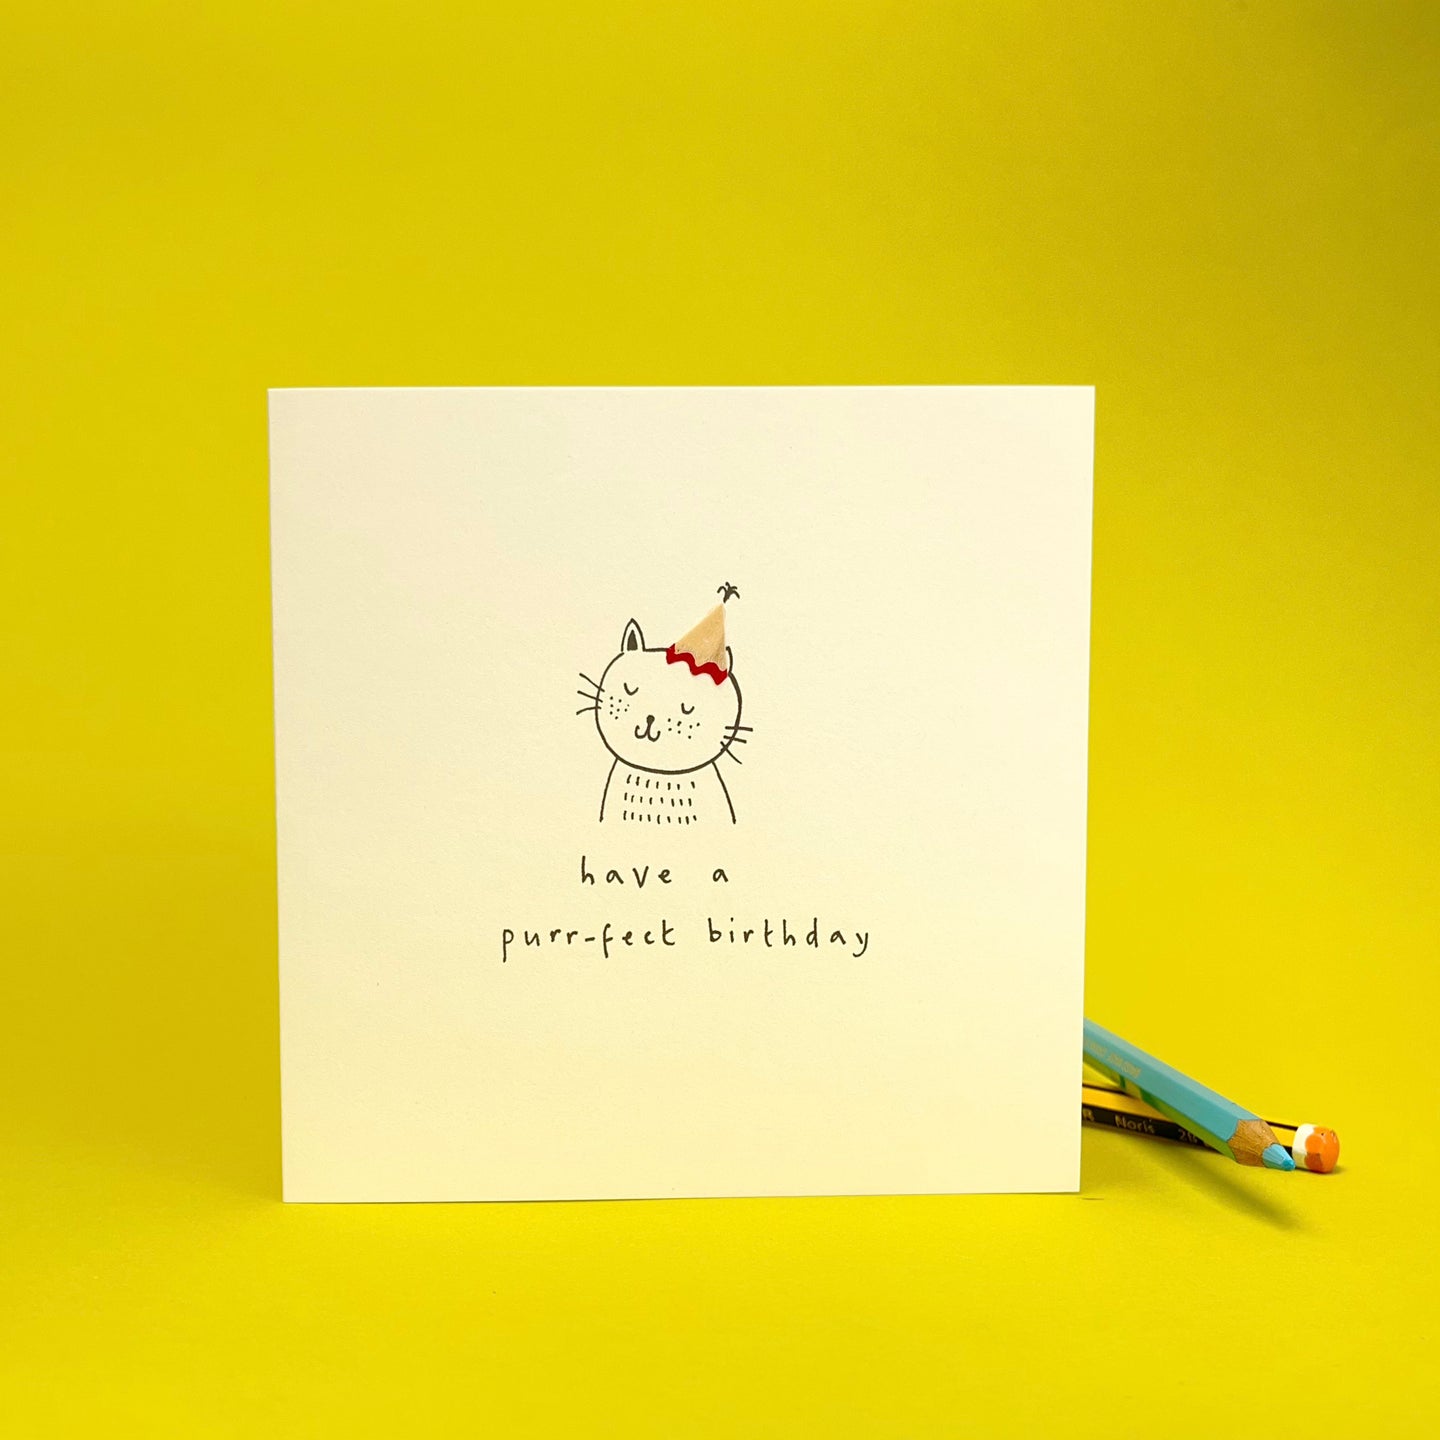 Greeting Card - have a purr-fect birthday